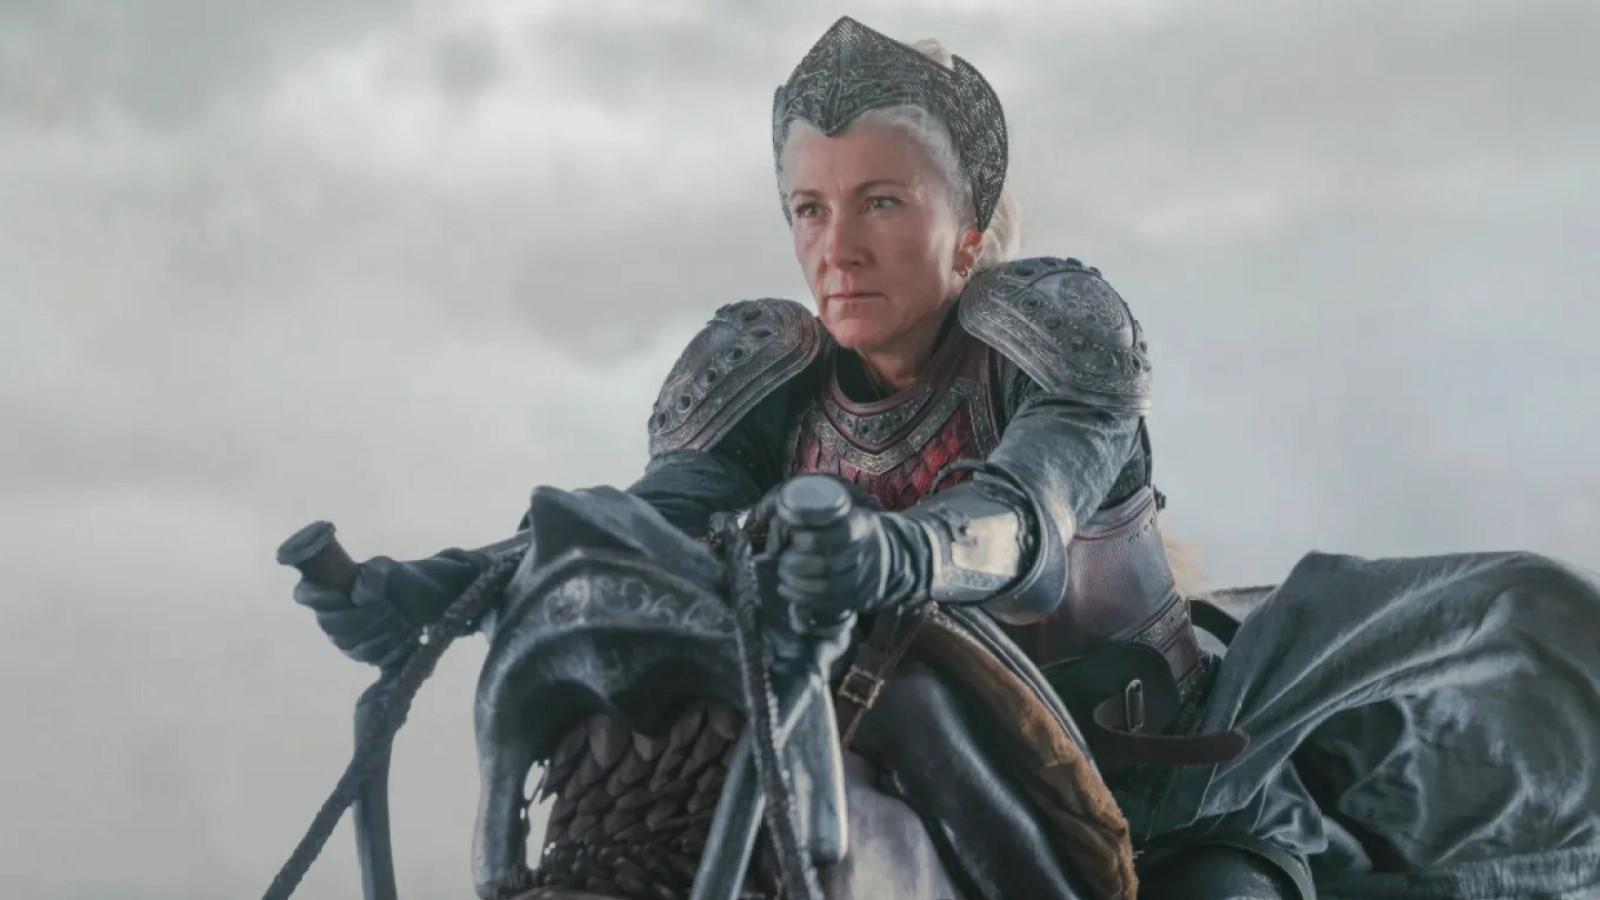 Eve Best as Rhaenys Targaryen in House of the Dragon during the Battle of Rook's Rest